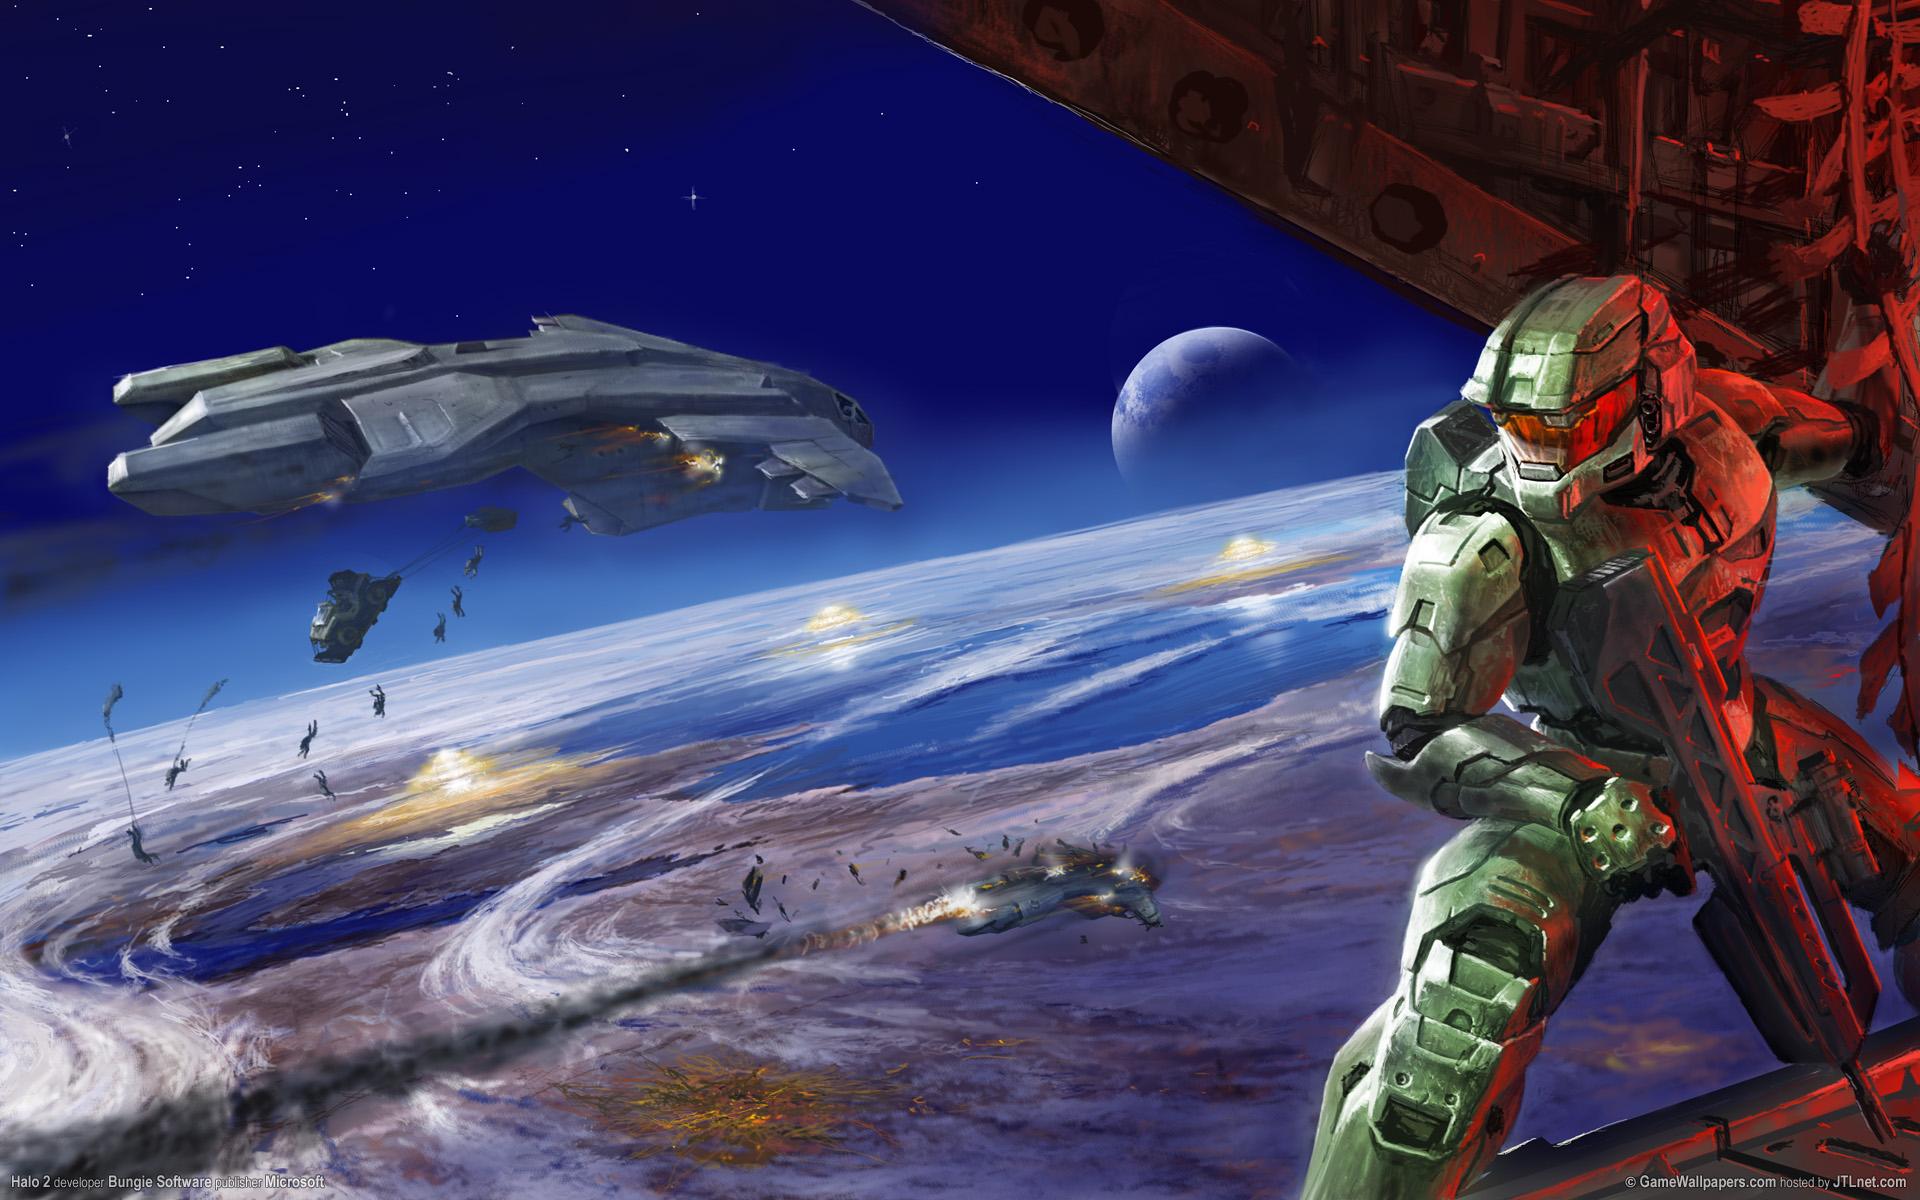 What's Your Favourite Artwork Image From Halo? Here's Mine